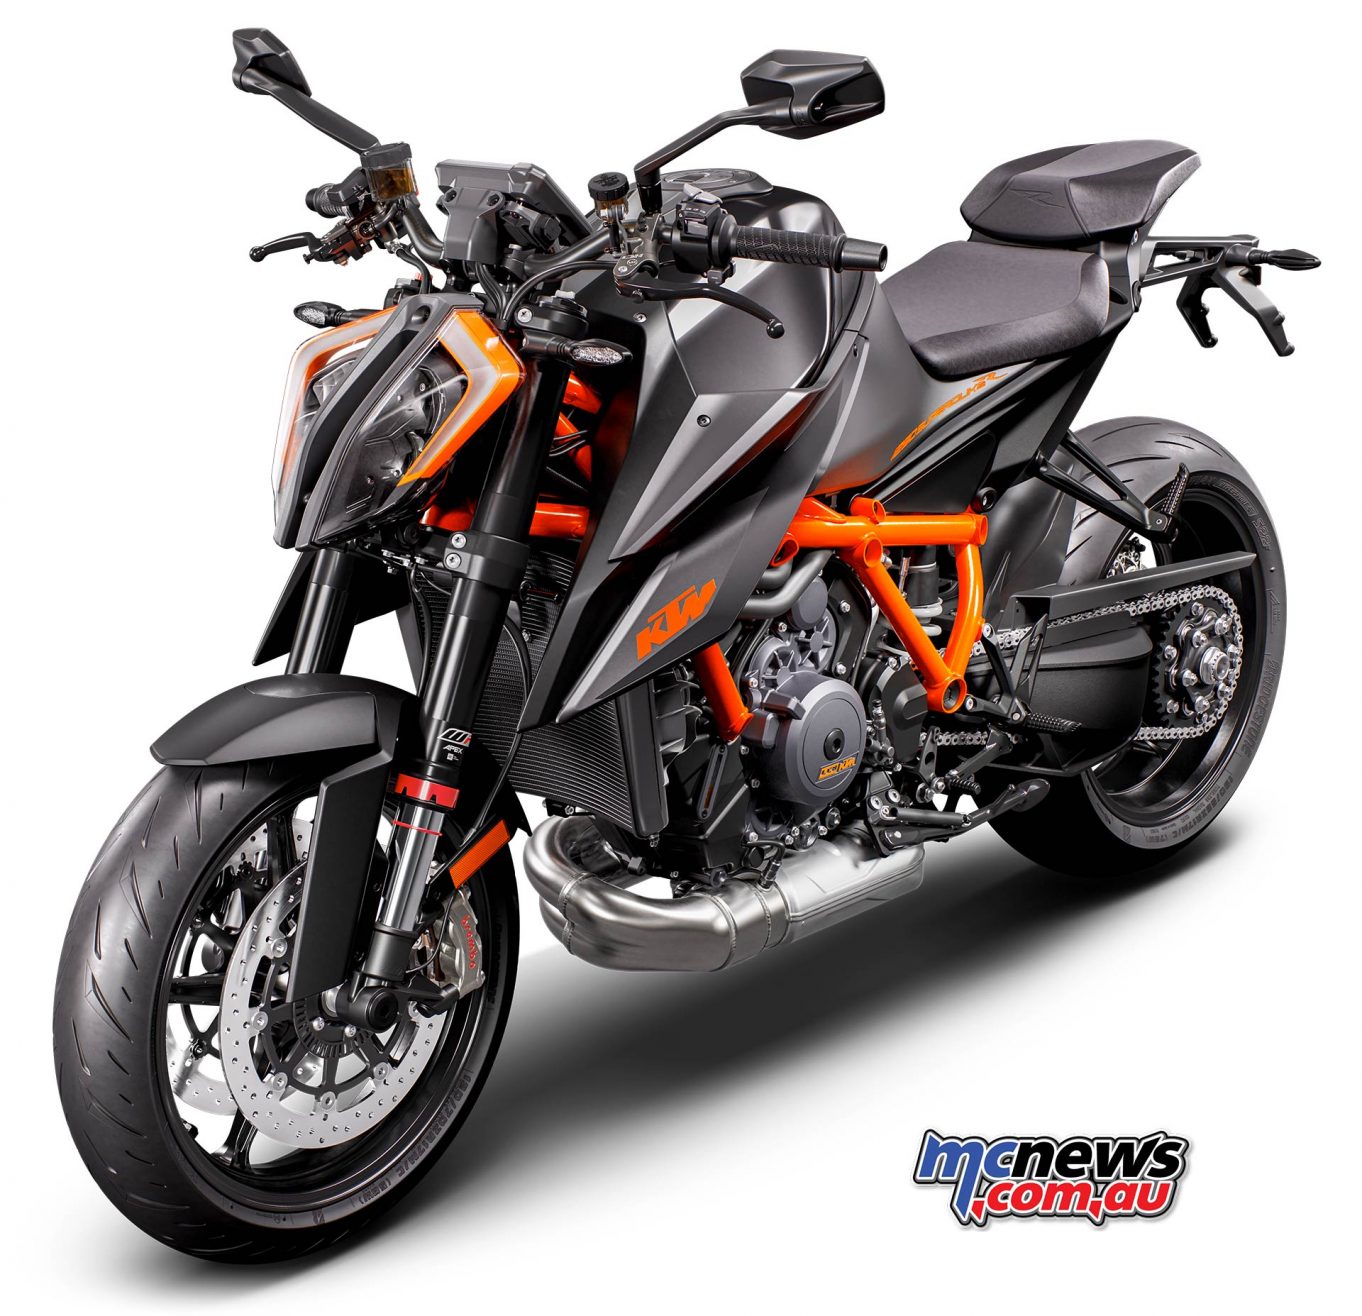 2020 KTM 1290 Super Duke R | The beast goes to the gym | MCNews